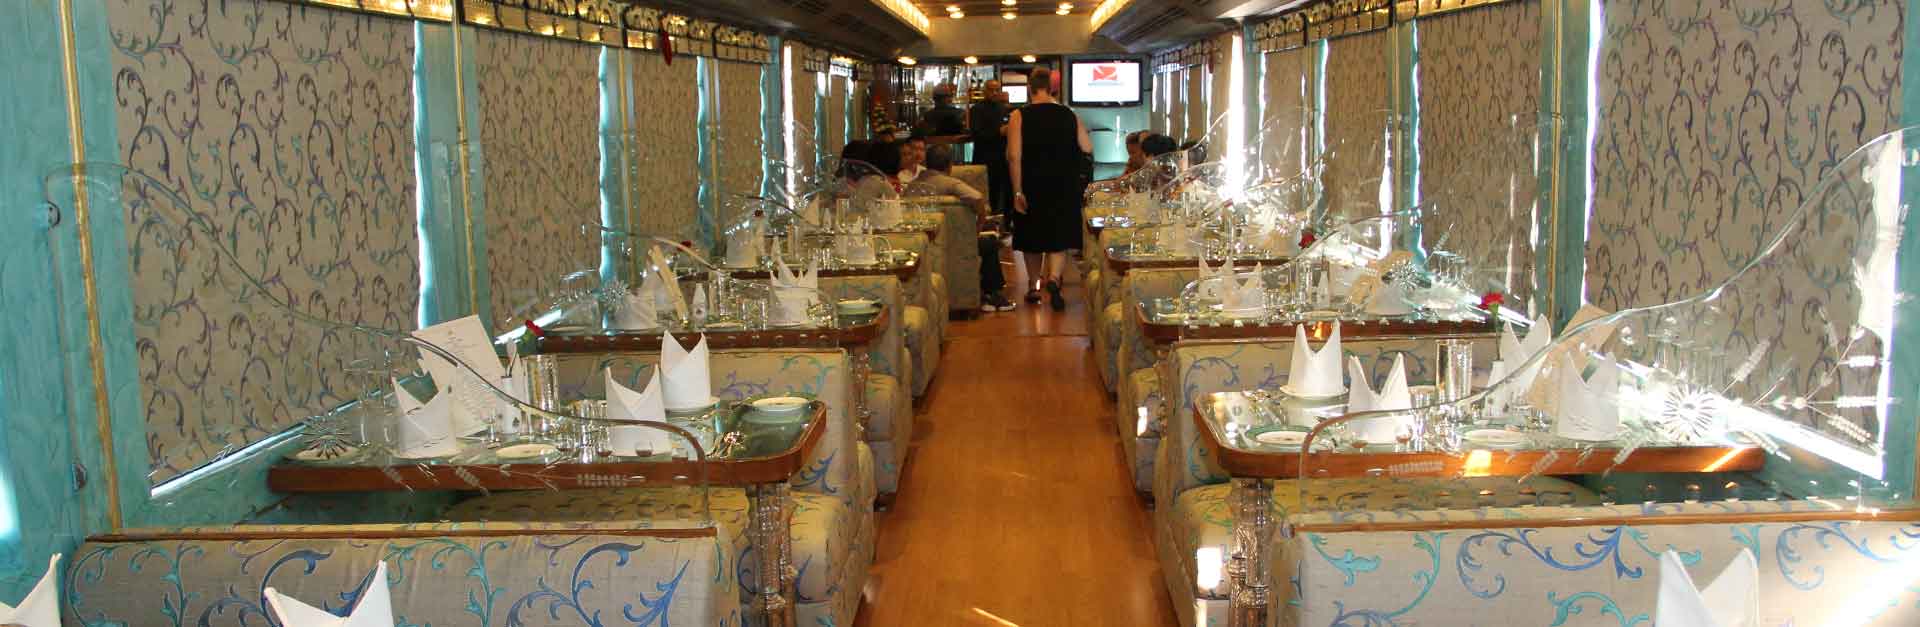 royal rajasthan on wheels route